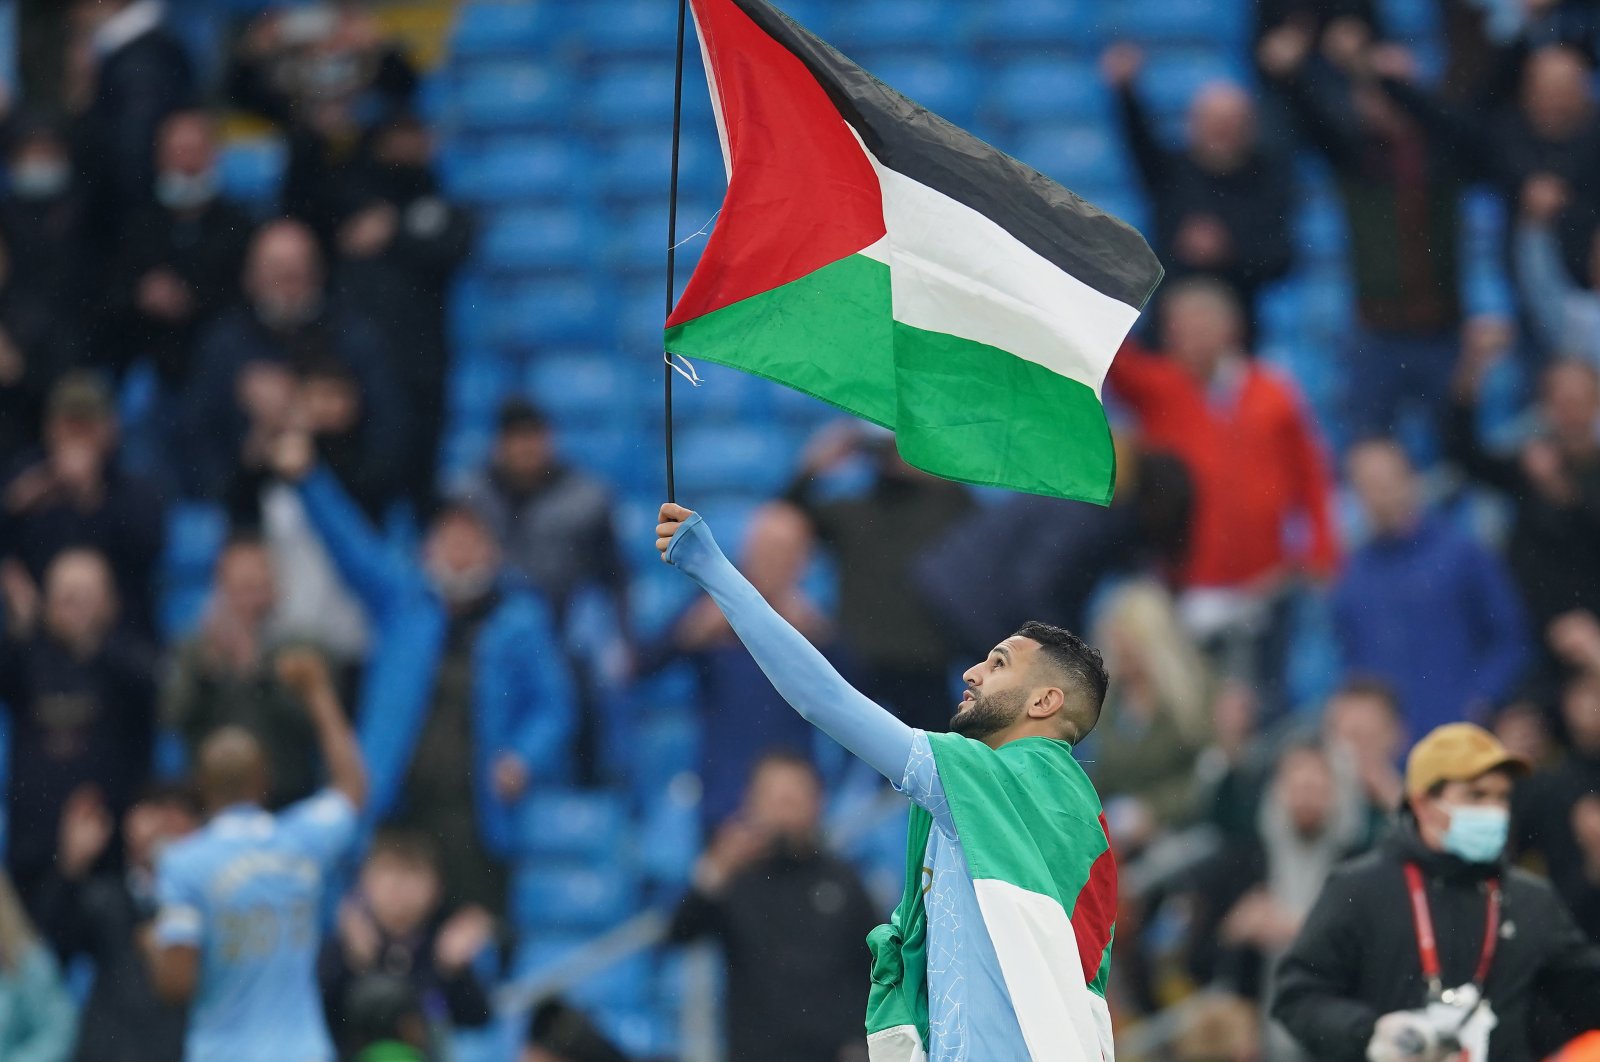 Former Manchester City forward Riyad Mahrez wears the flag of Algeria, as he carries the flag of Palestine at Etihad Stadium, Manchester, U.K., May 23, 2021. (Getty Images Photo)